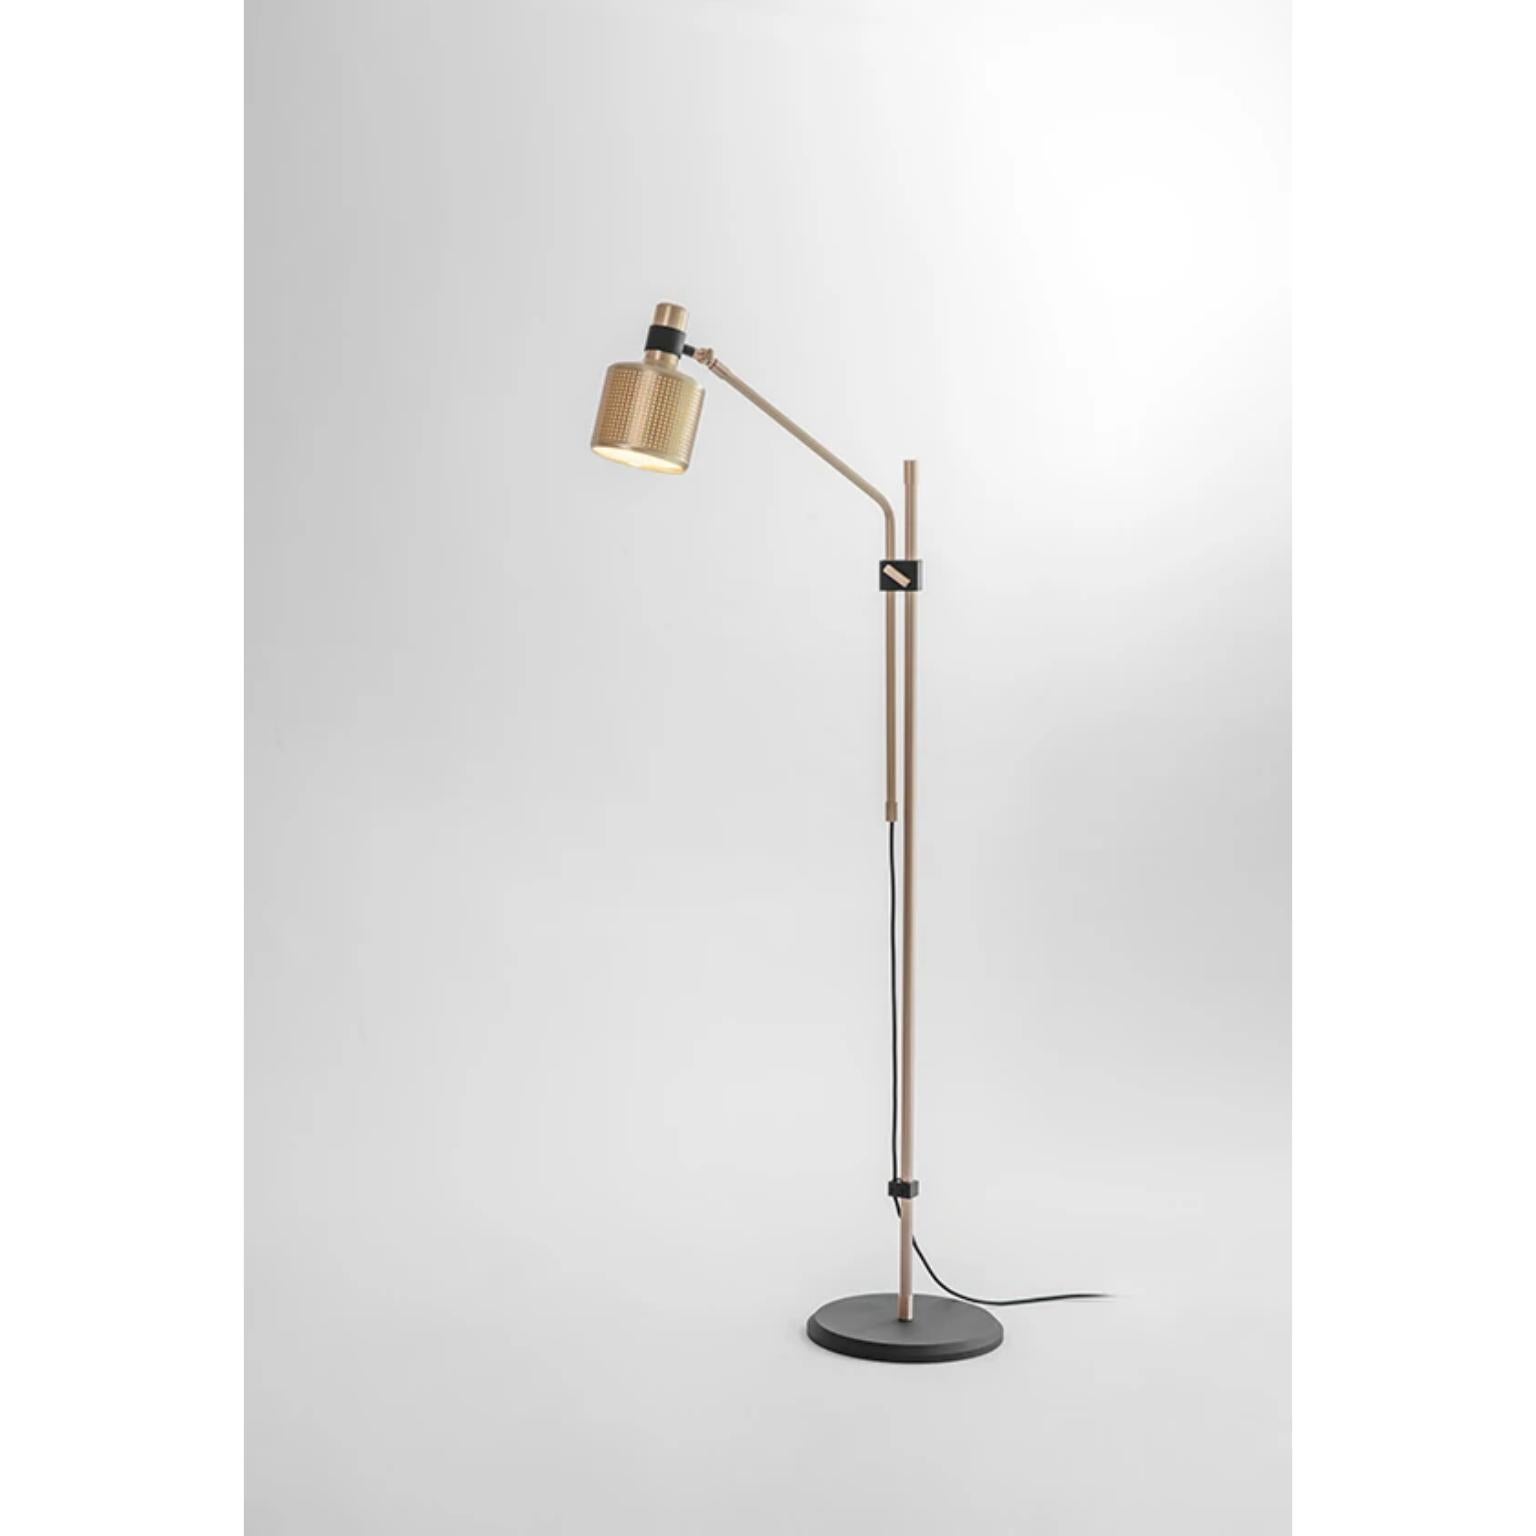 Single Riddle floor lamp by Bert Frank
Dimensions: 25 x 52 x H 130 cm 
Materials: Brass 

All our lamps can be wired according to each country. If sold to the USA it will be wired for the USA for instance.

When Adam Yeats and Robbie Llewellyn